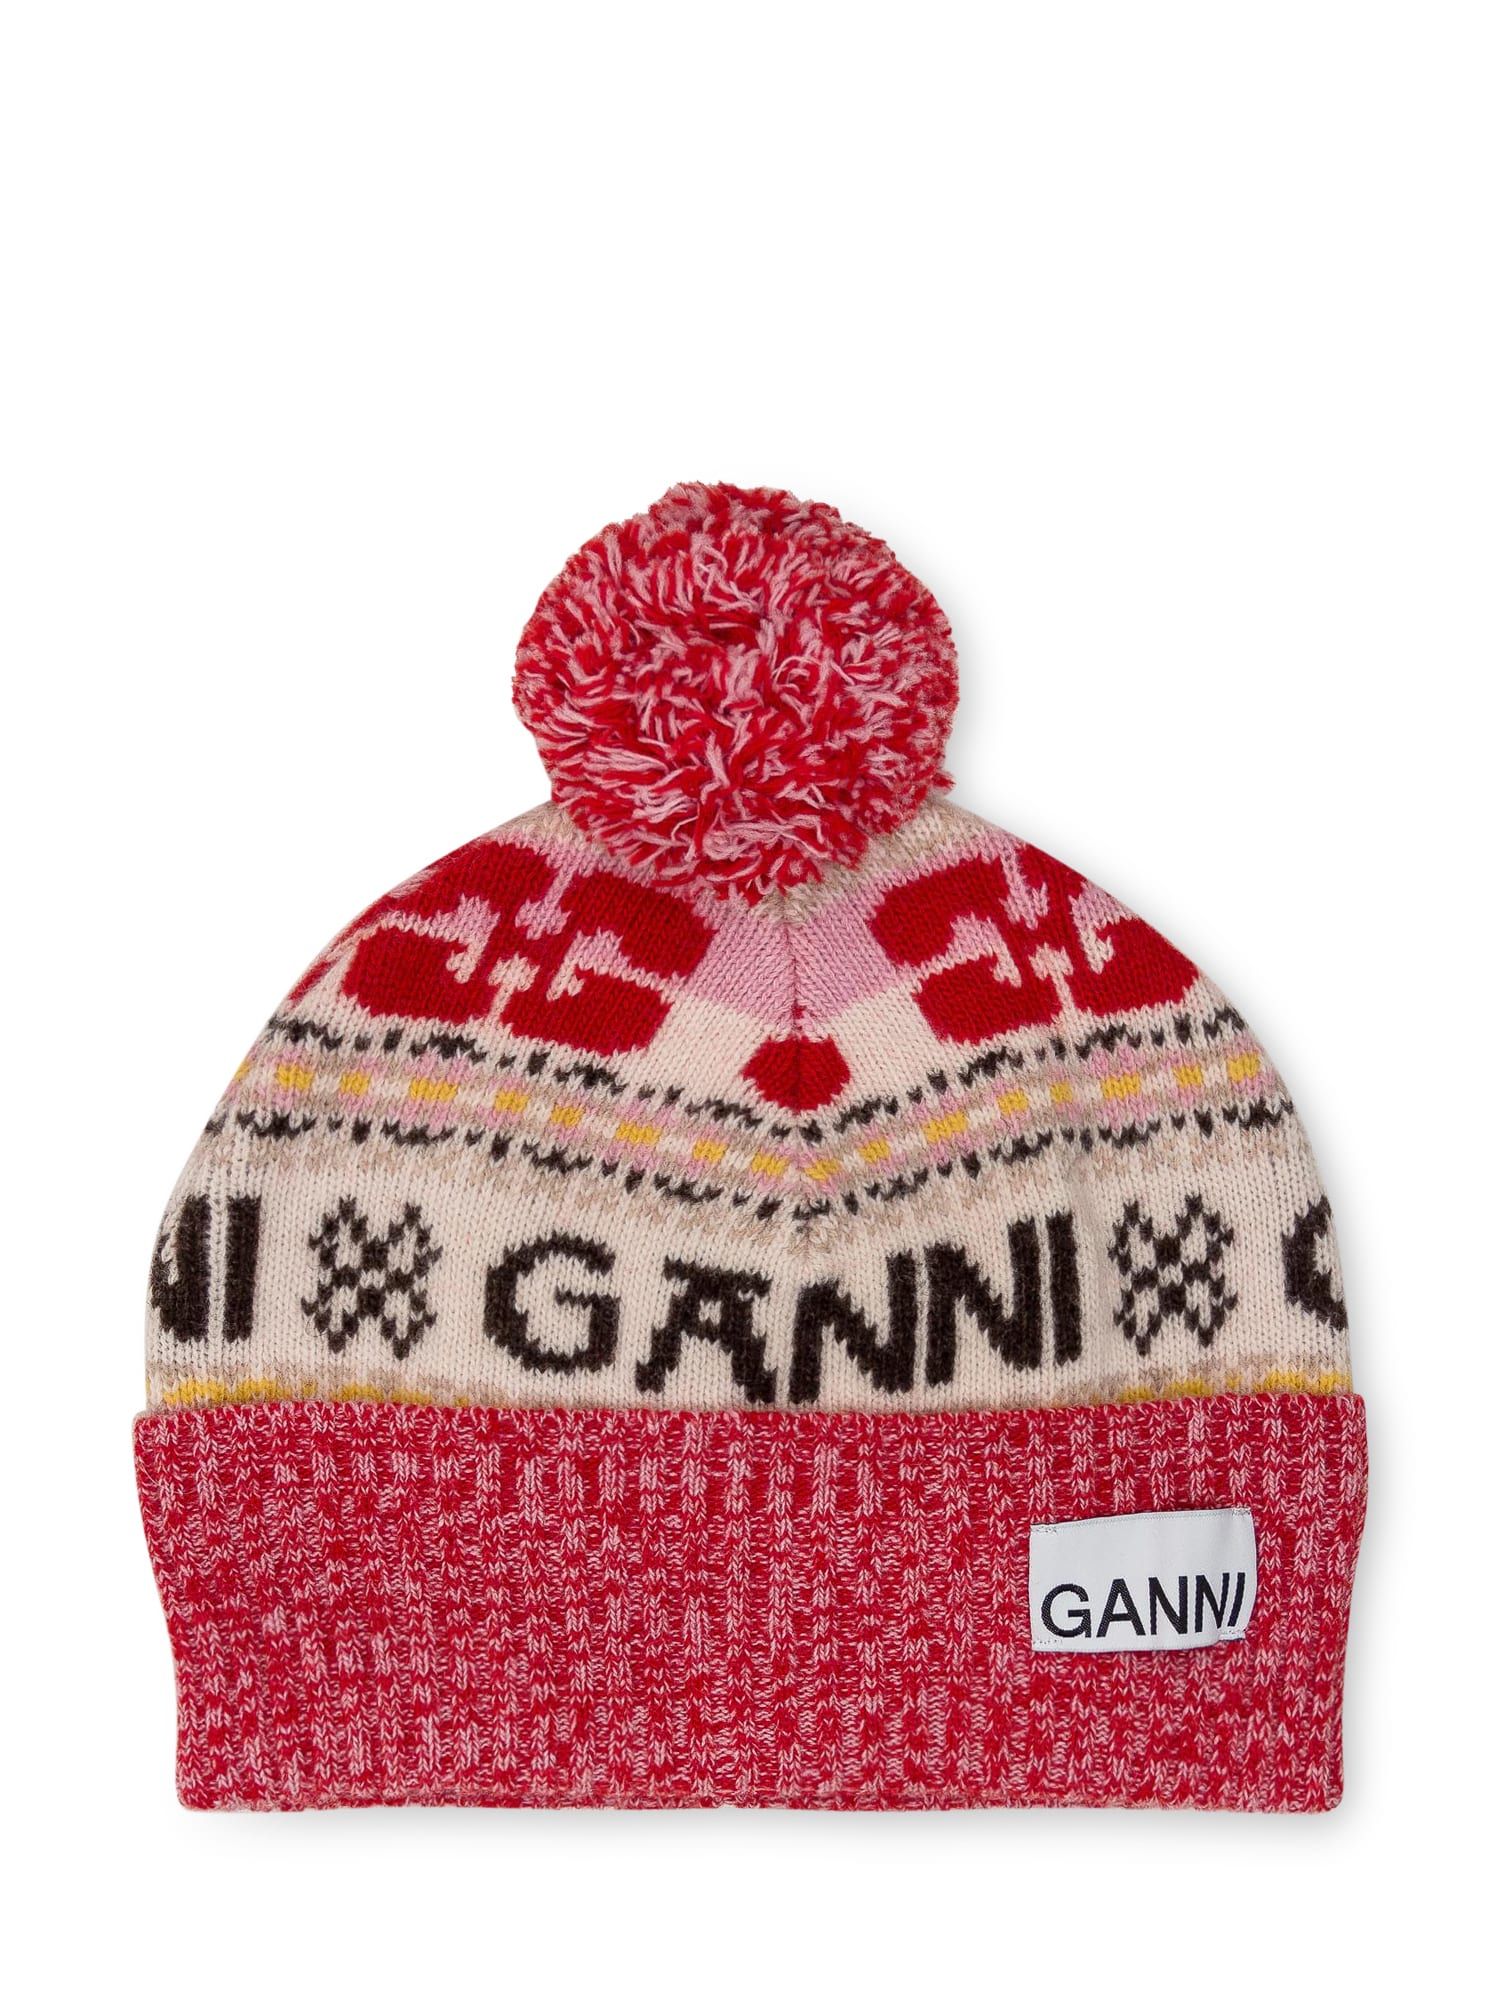 Beige Ribbed Beanie by GANNI on Sale